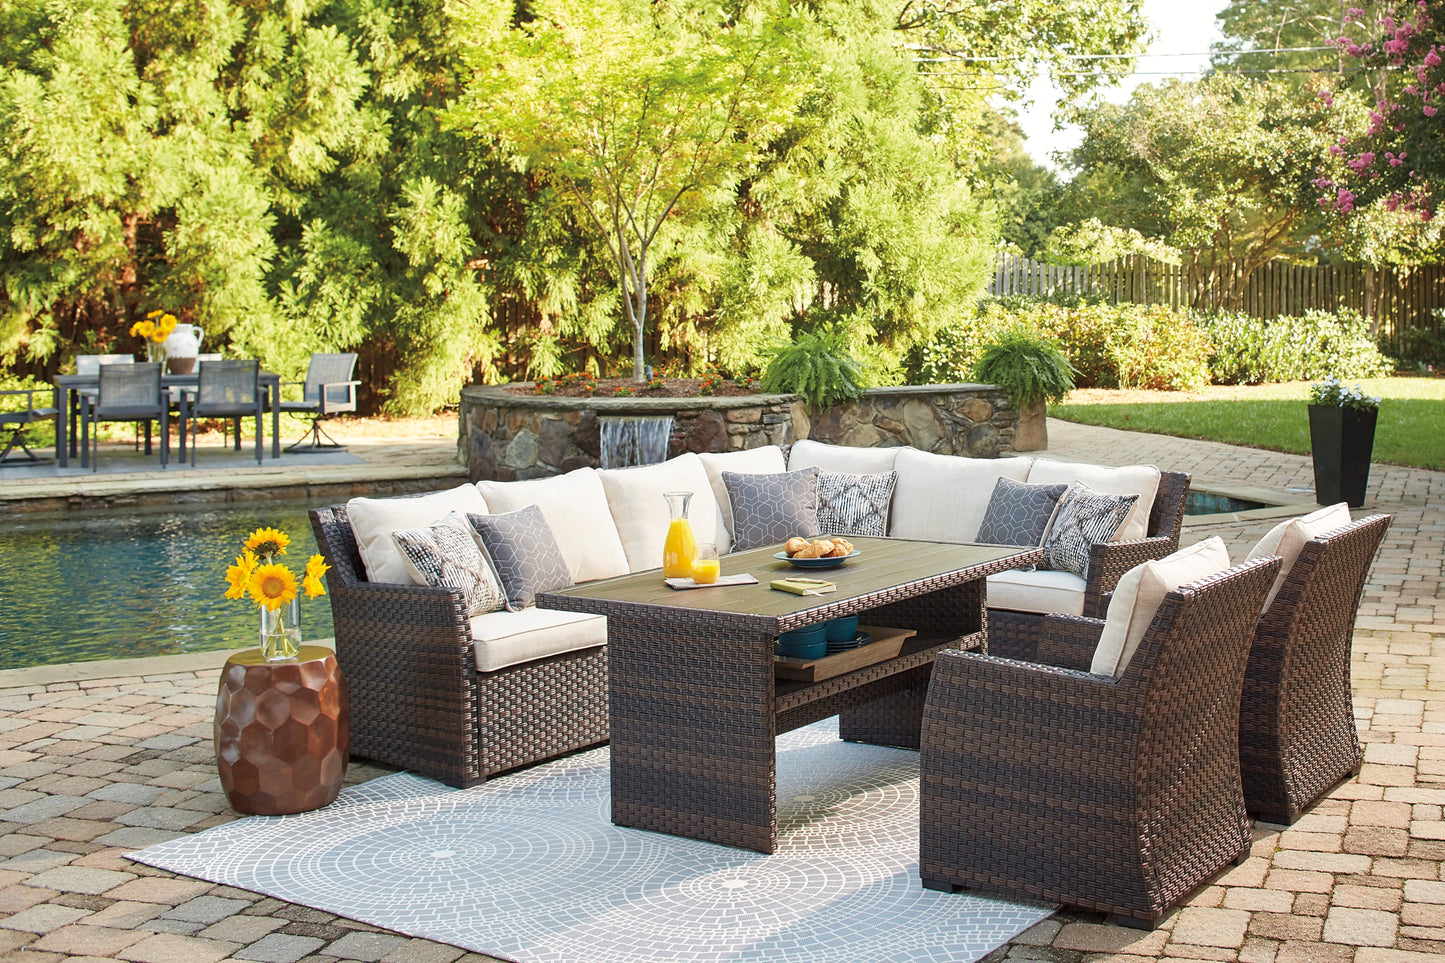 Easy Isle 3-Piece Outdoor Sectional with 2 Chairs and Coffee Table JB's Furniture Furniture, Bedroom, Accessories